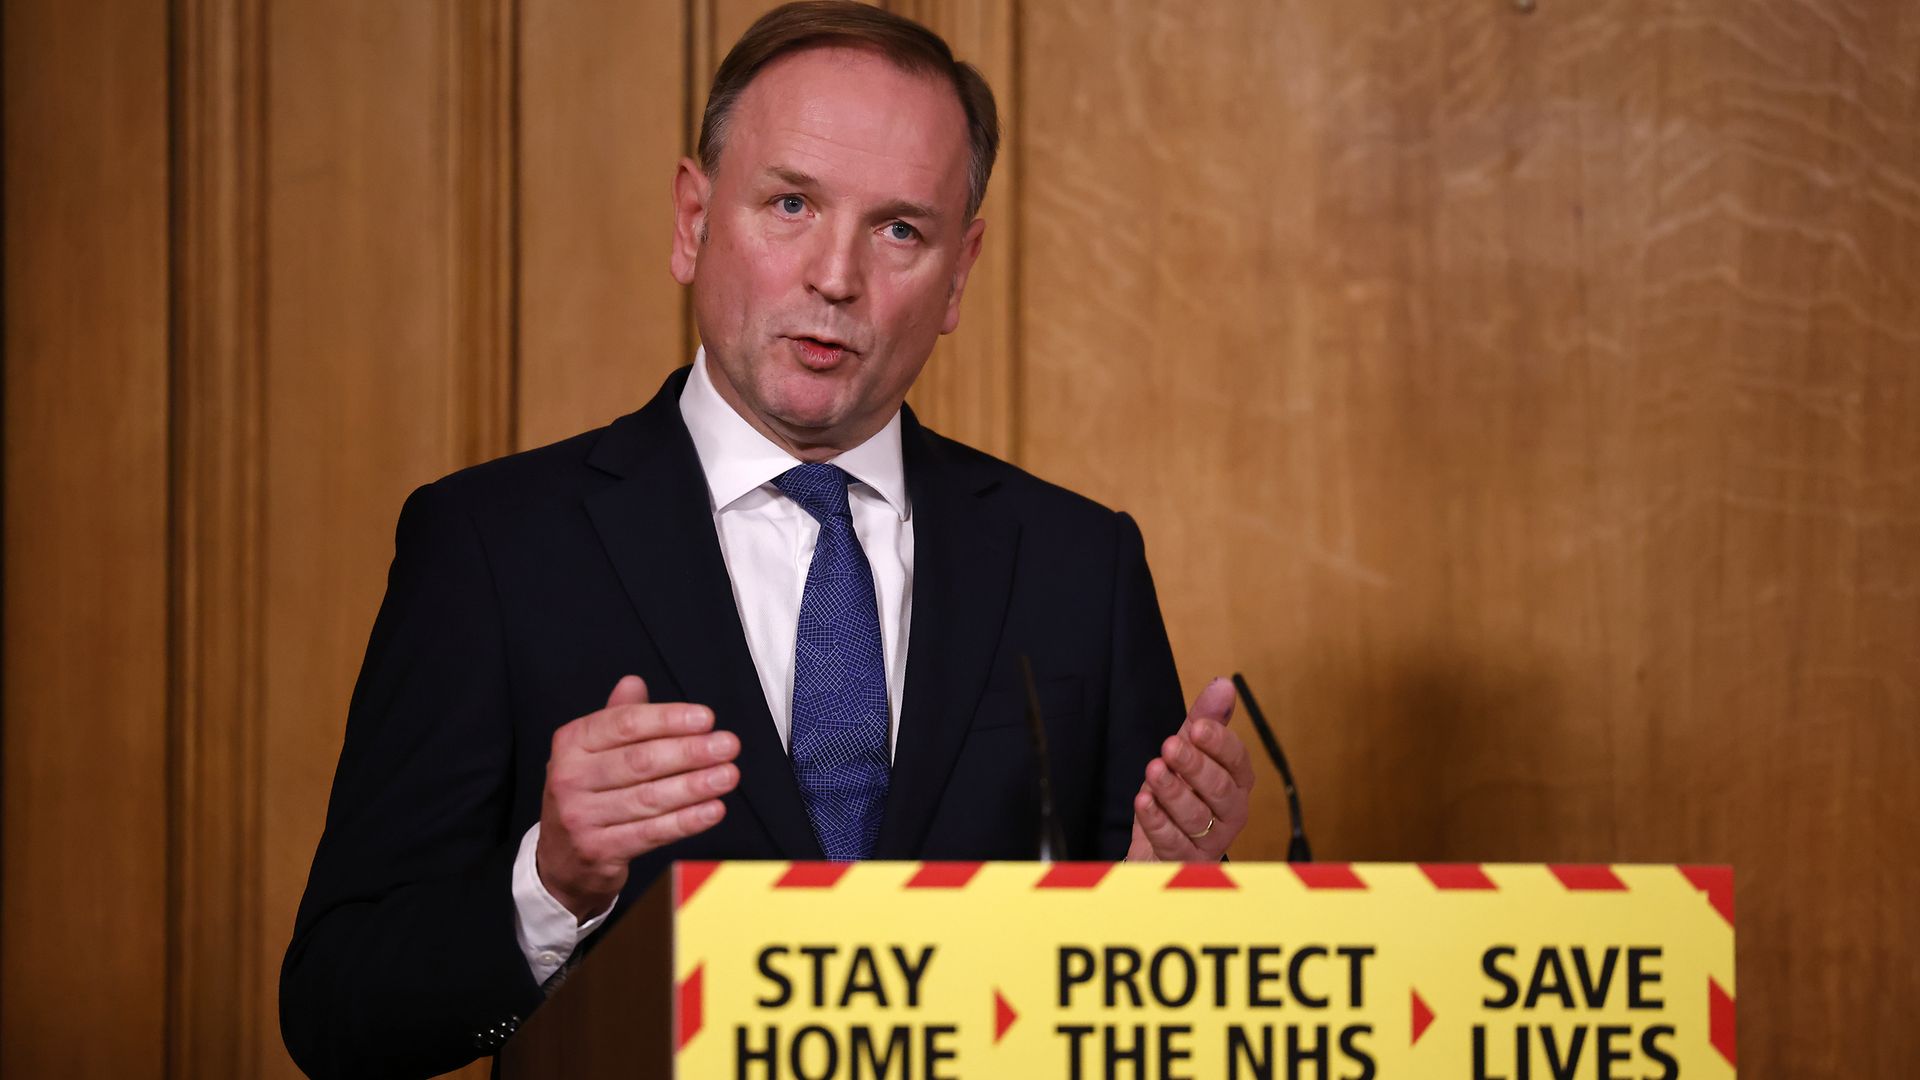 Sir Simon Stevens, Chief Executive of the National Health Service in England during a media briefing on coronavirus (COVID-19) in Downing Street, London. - Credit: PA